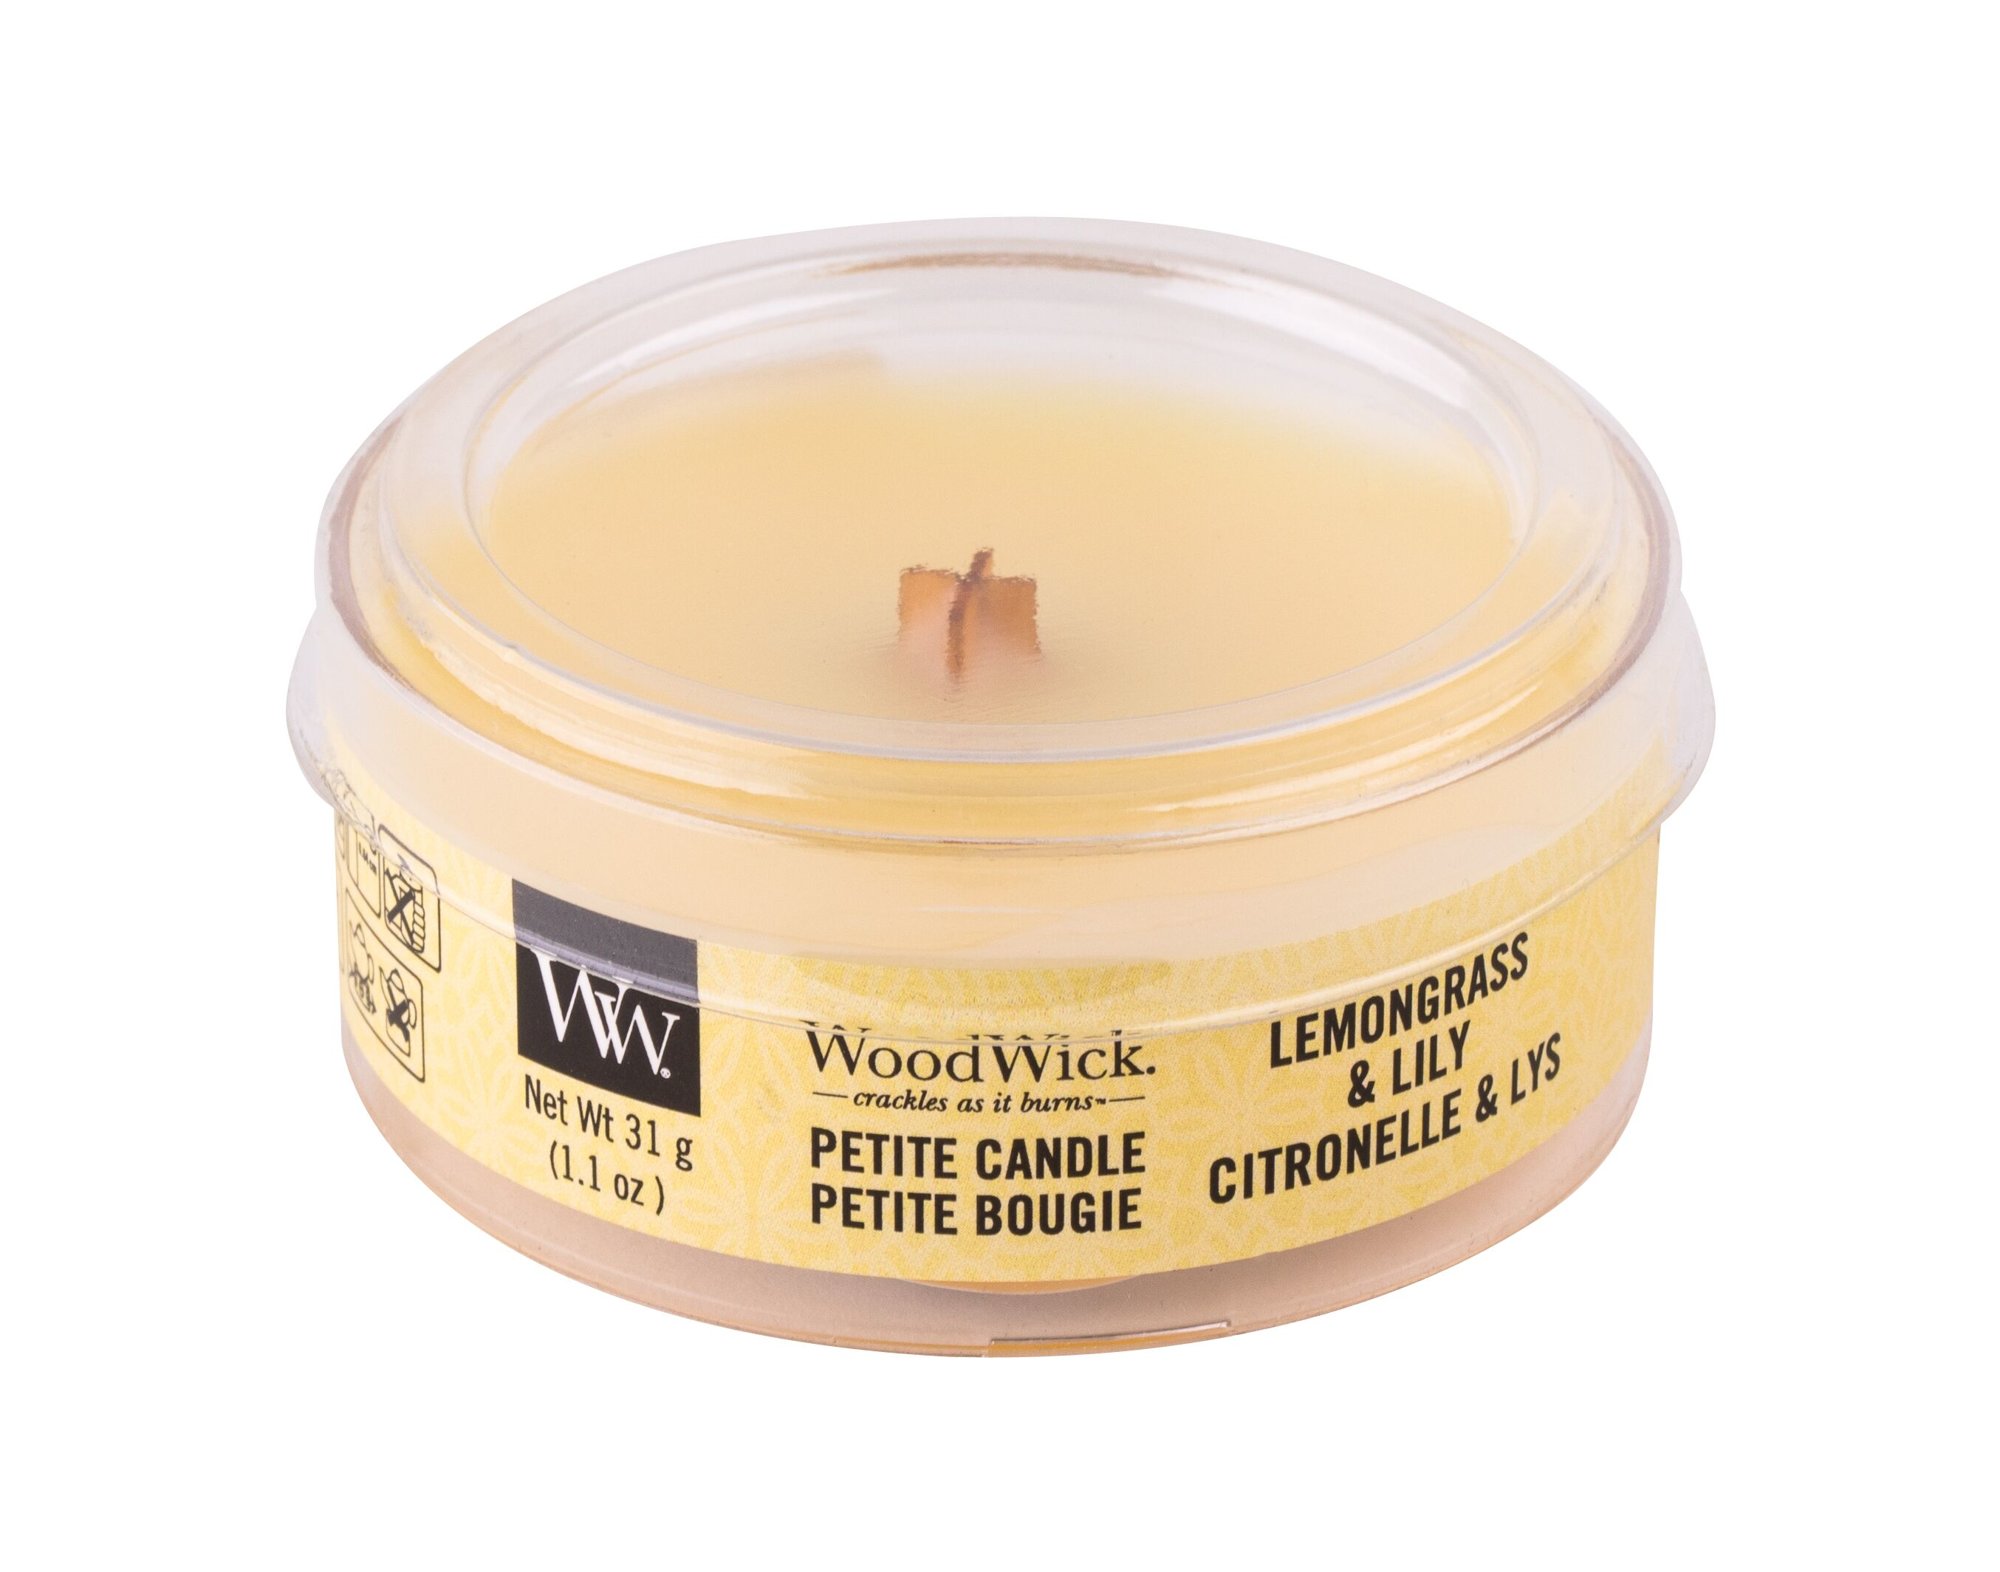 WoodWick Lemongrass & Lily 31g Kvepalai Unisex Scented Candle